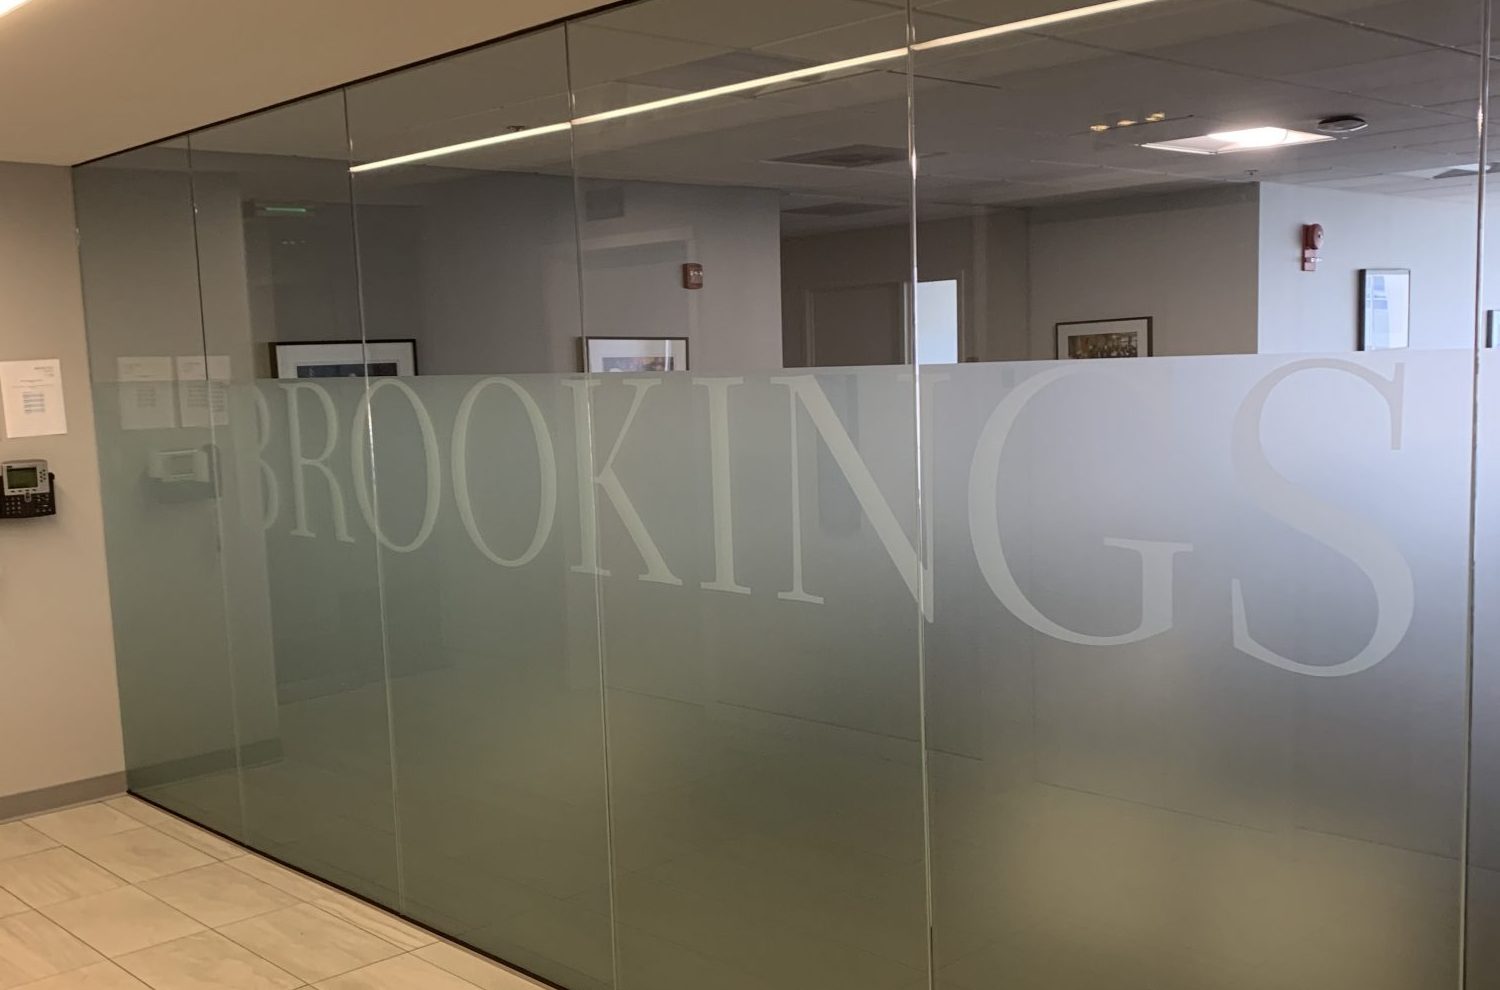 Brookings Office of Communications